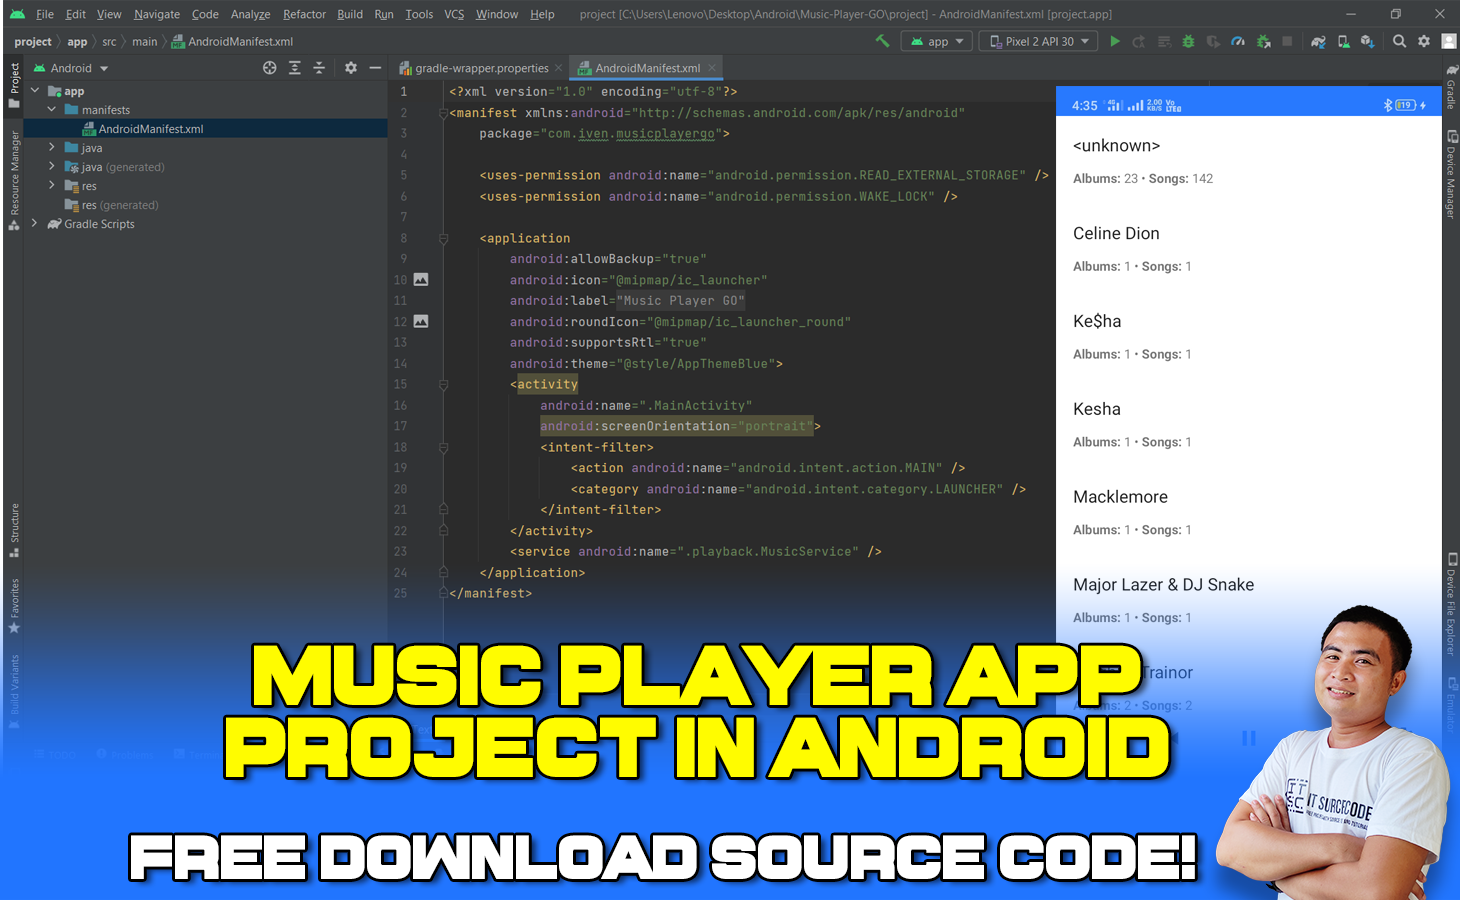 Music Player App In Android Studio With Source Code 2022 - FREE